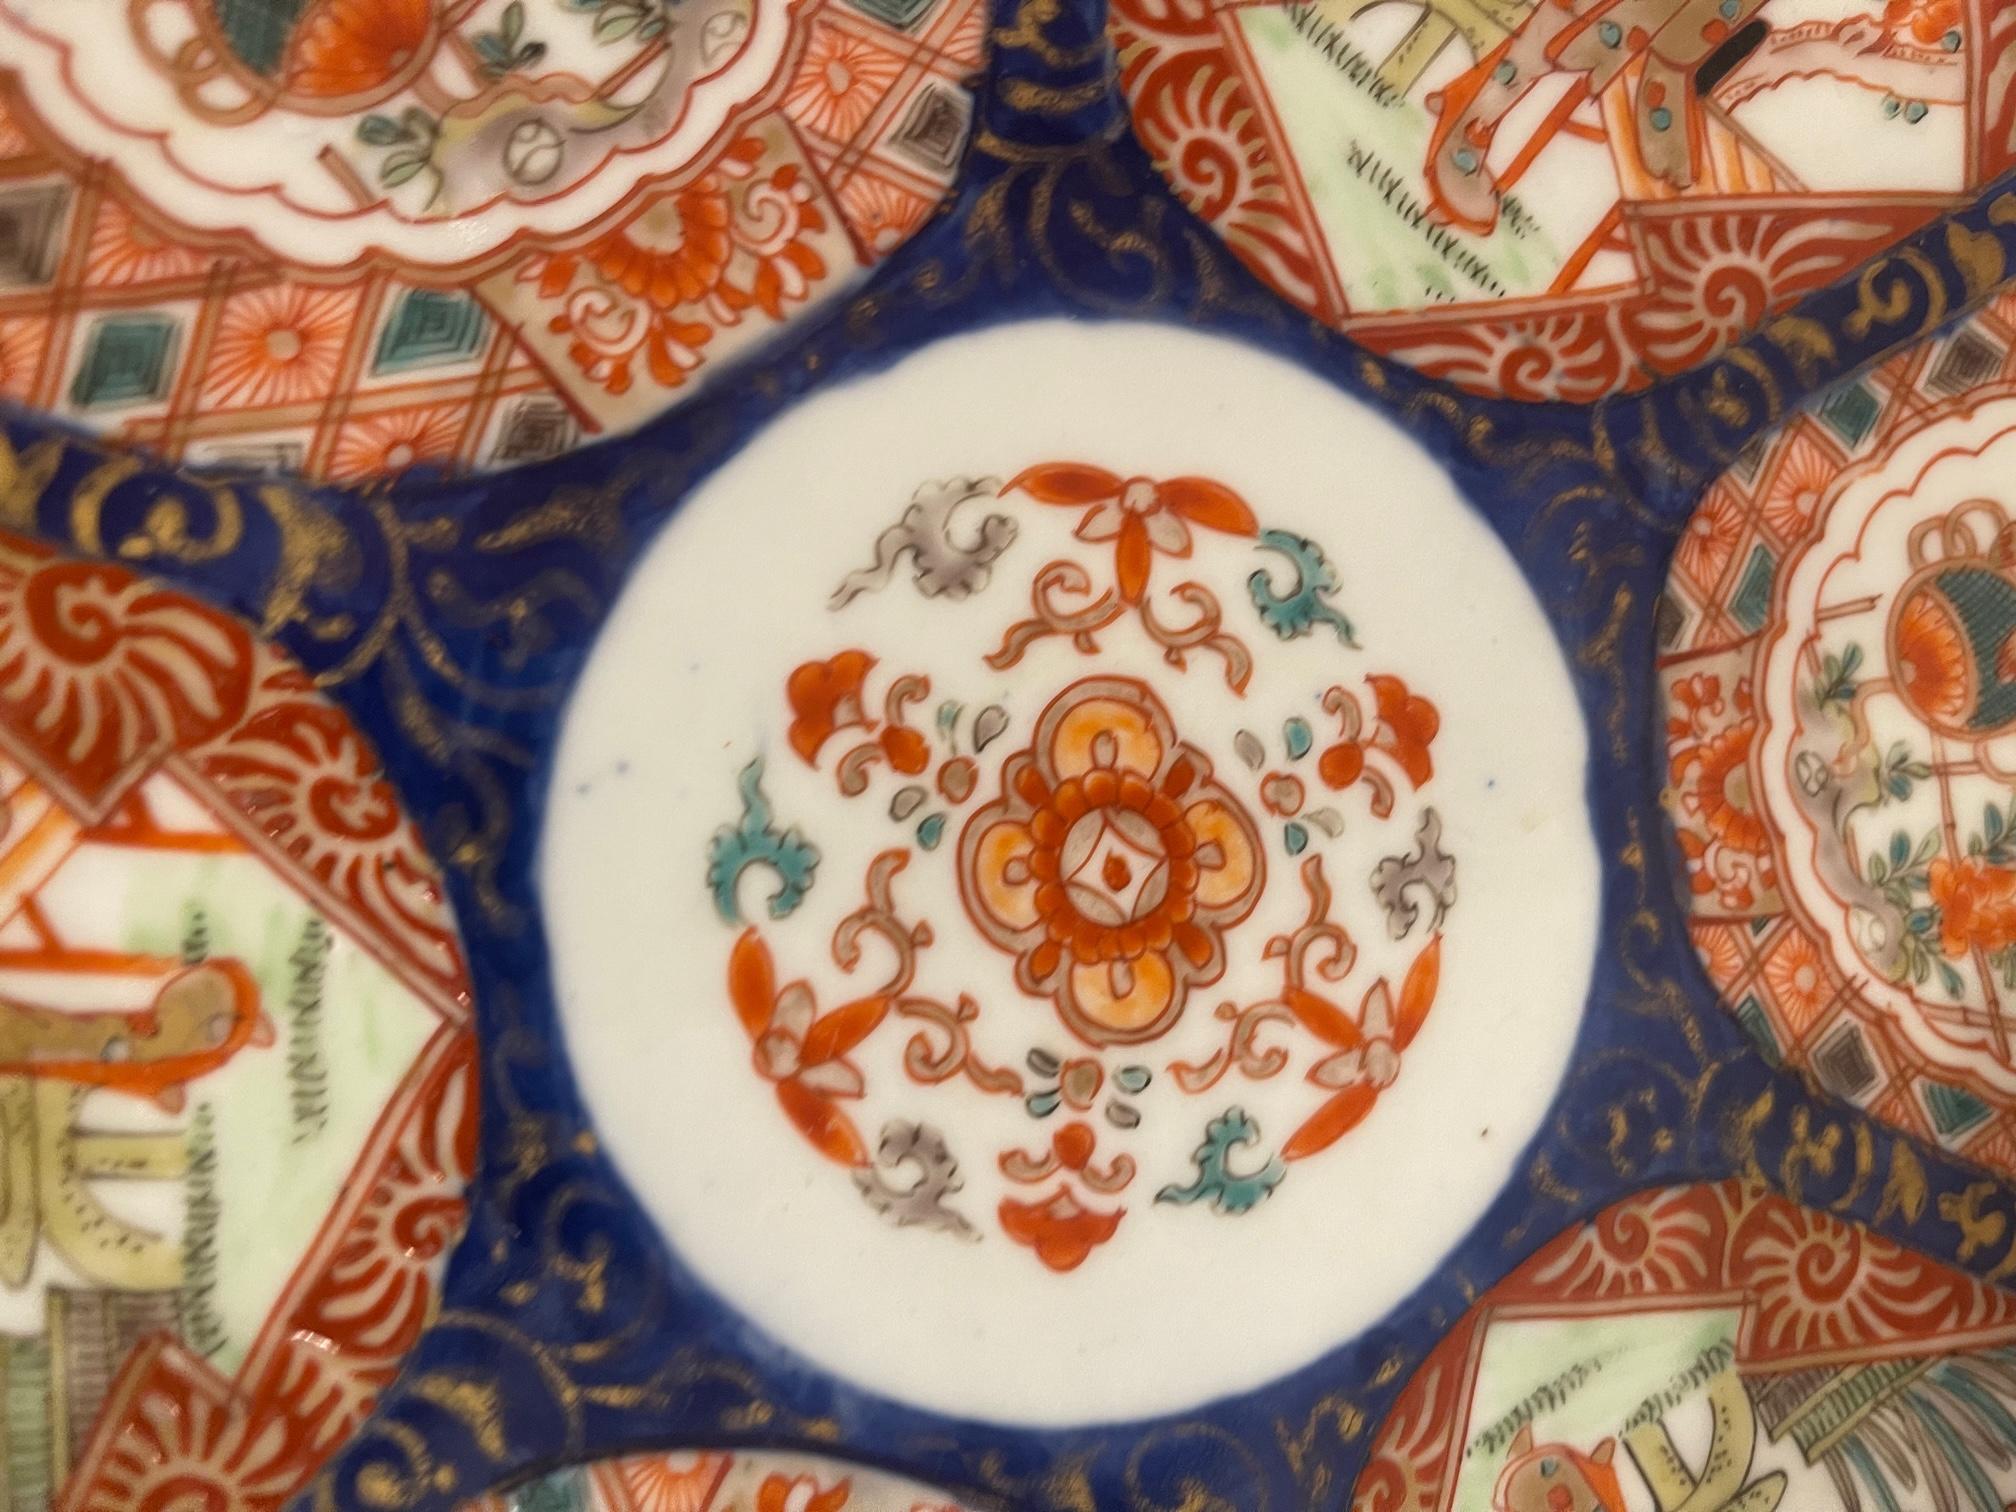 Imari Scalloped Charger Porcelain Plate, 19th Century In Good Condition For Sale In Savannah, GA